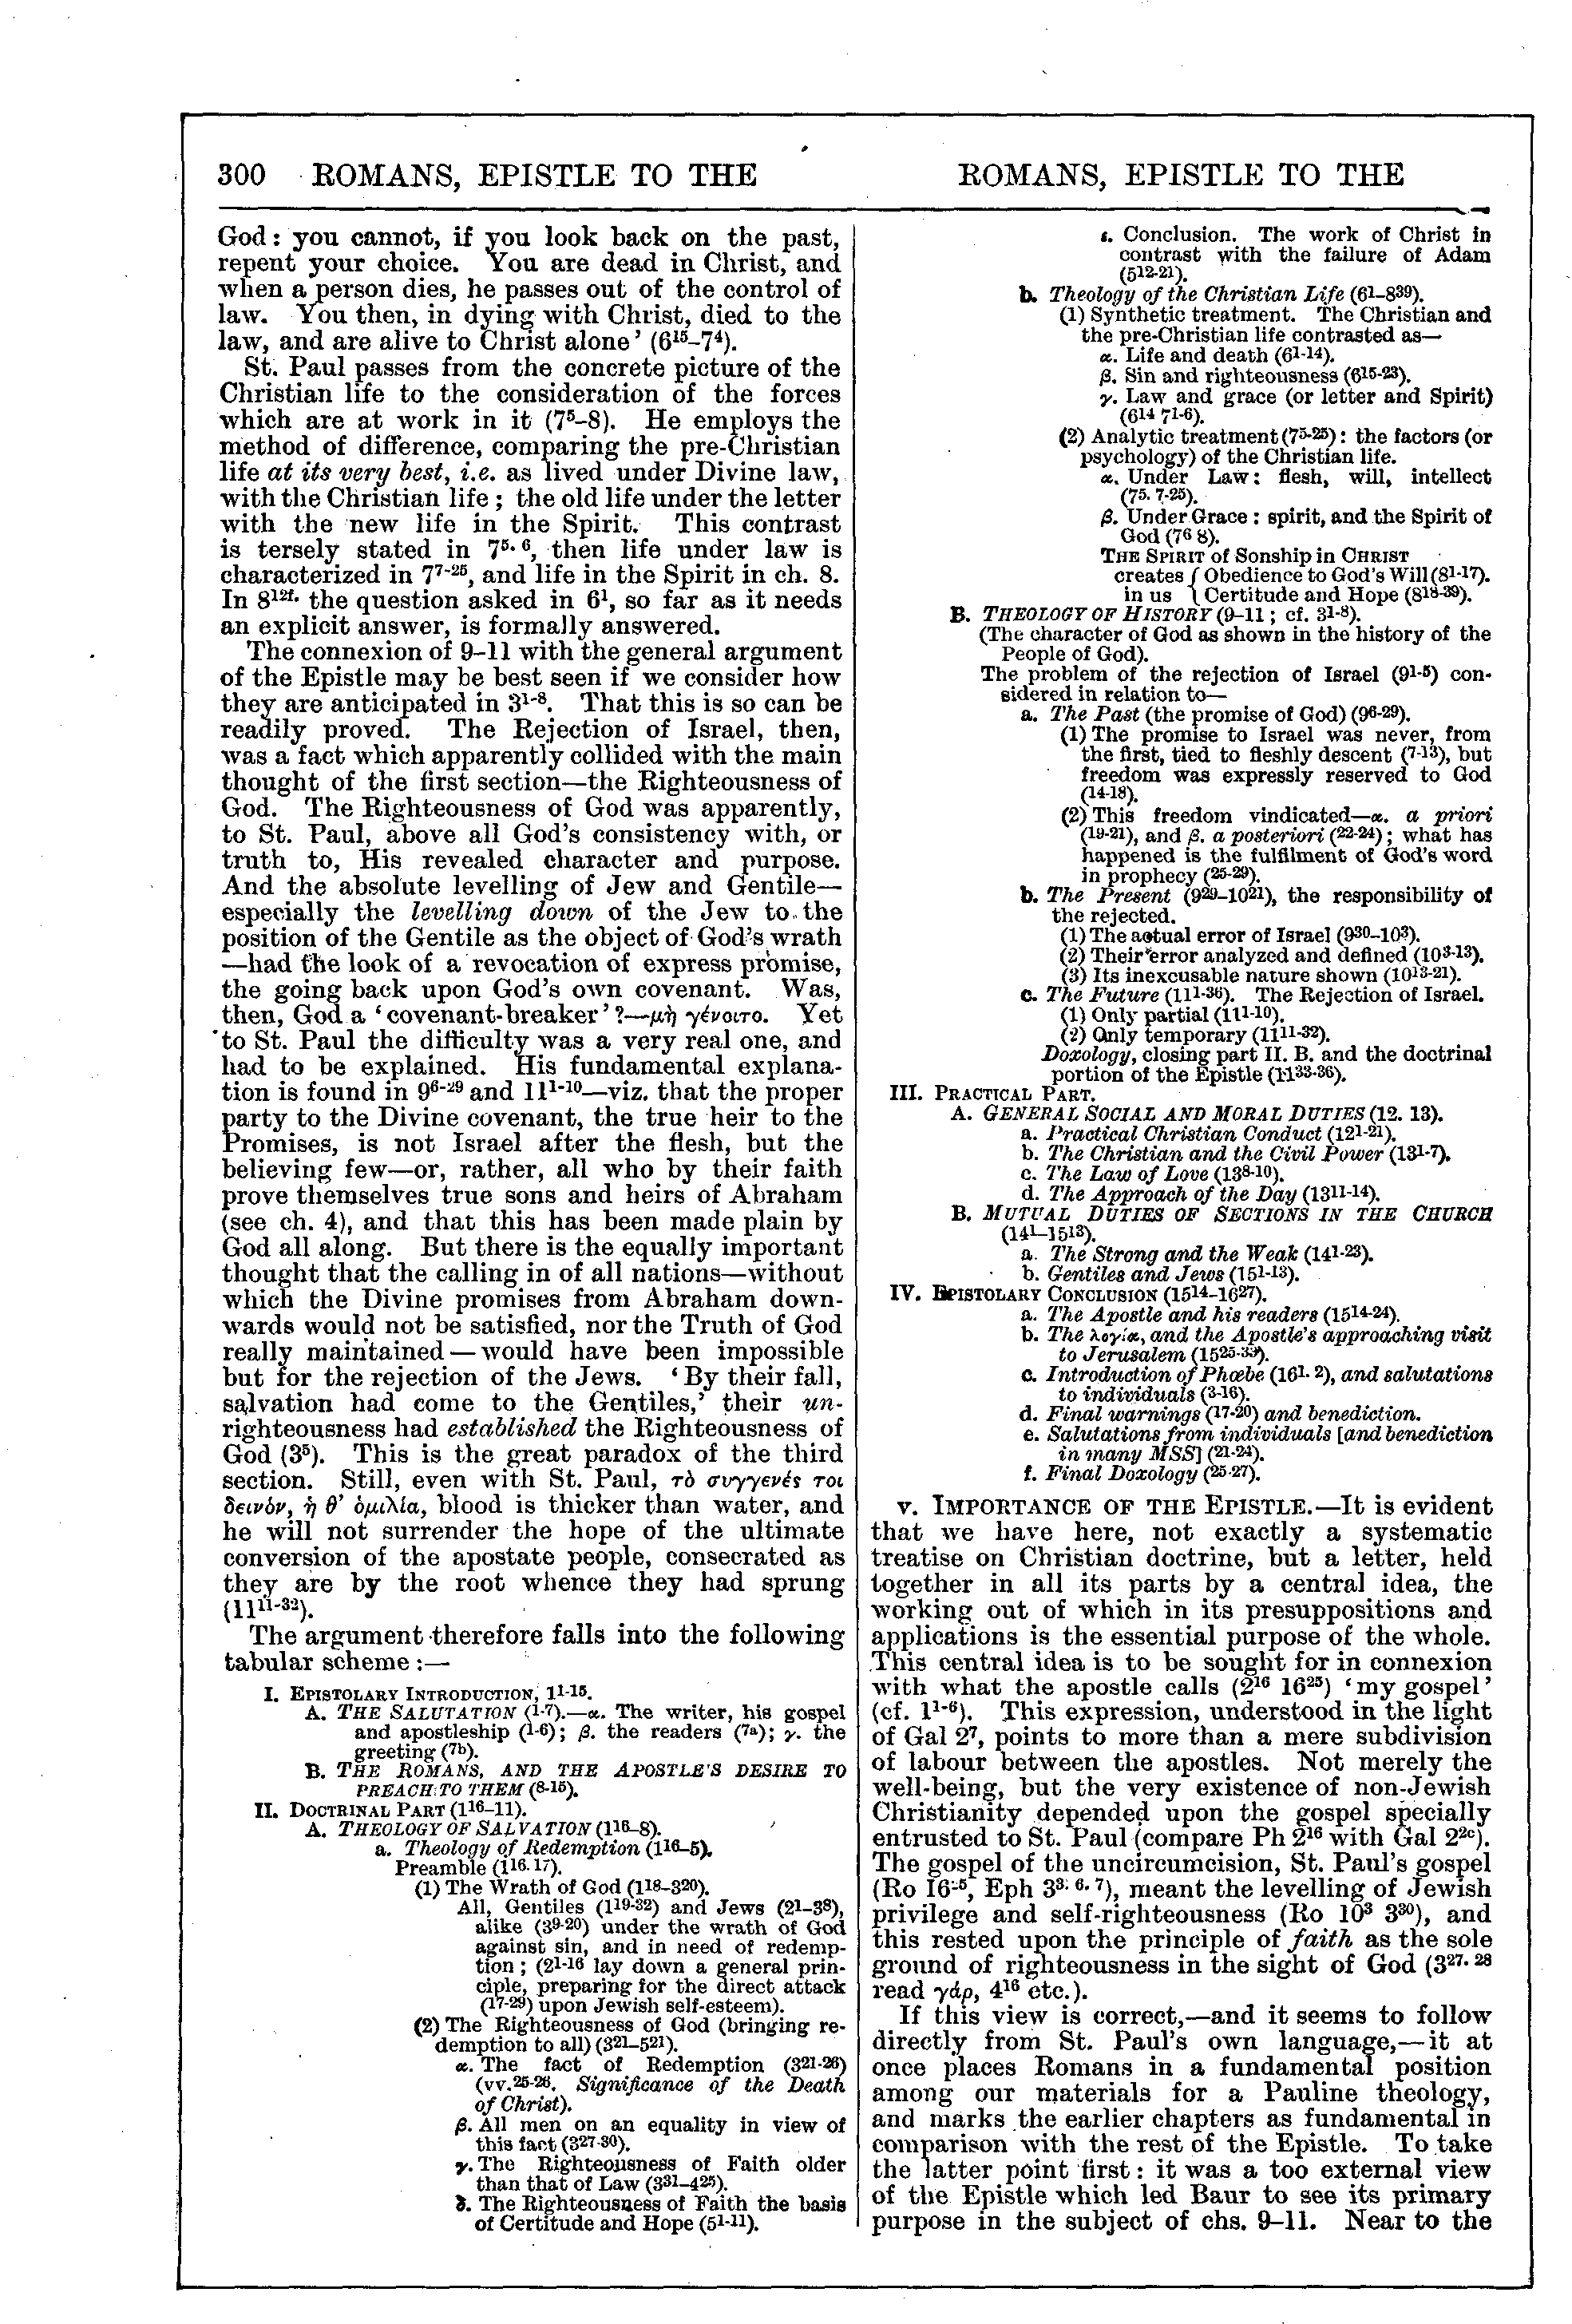 Image of page 300